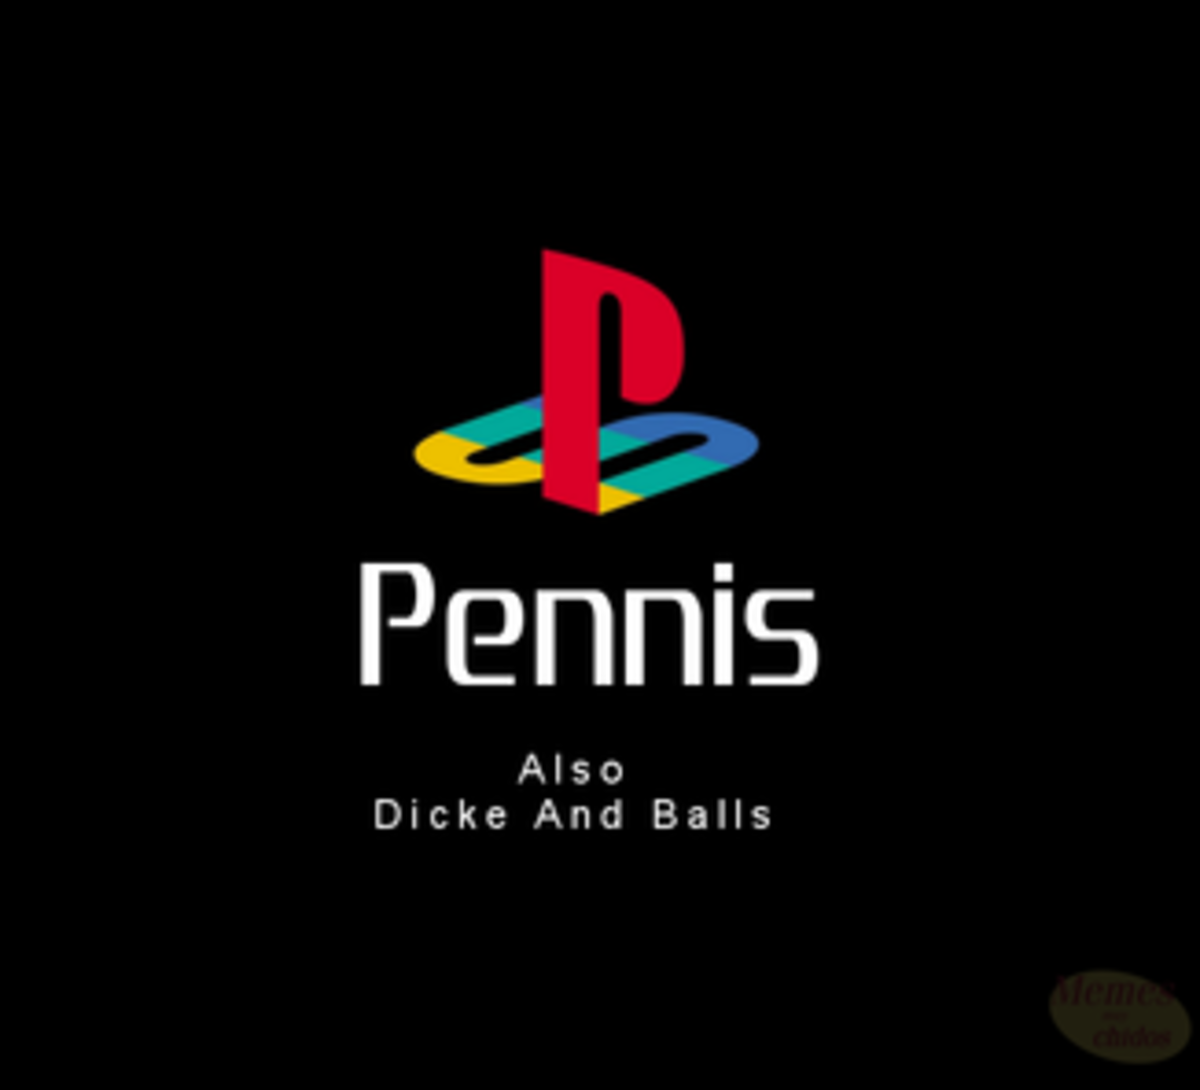 Pennis and also dicke and balls original